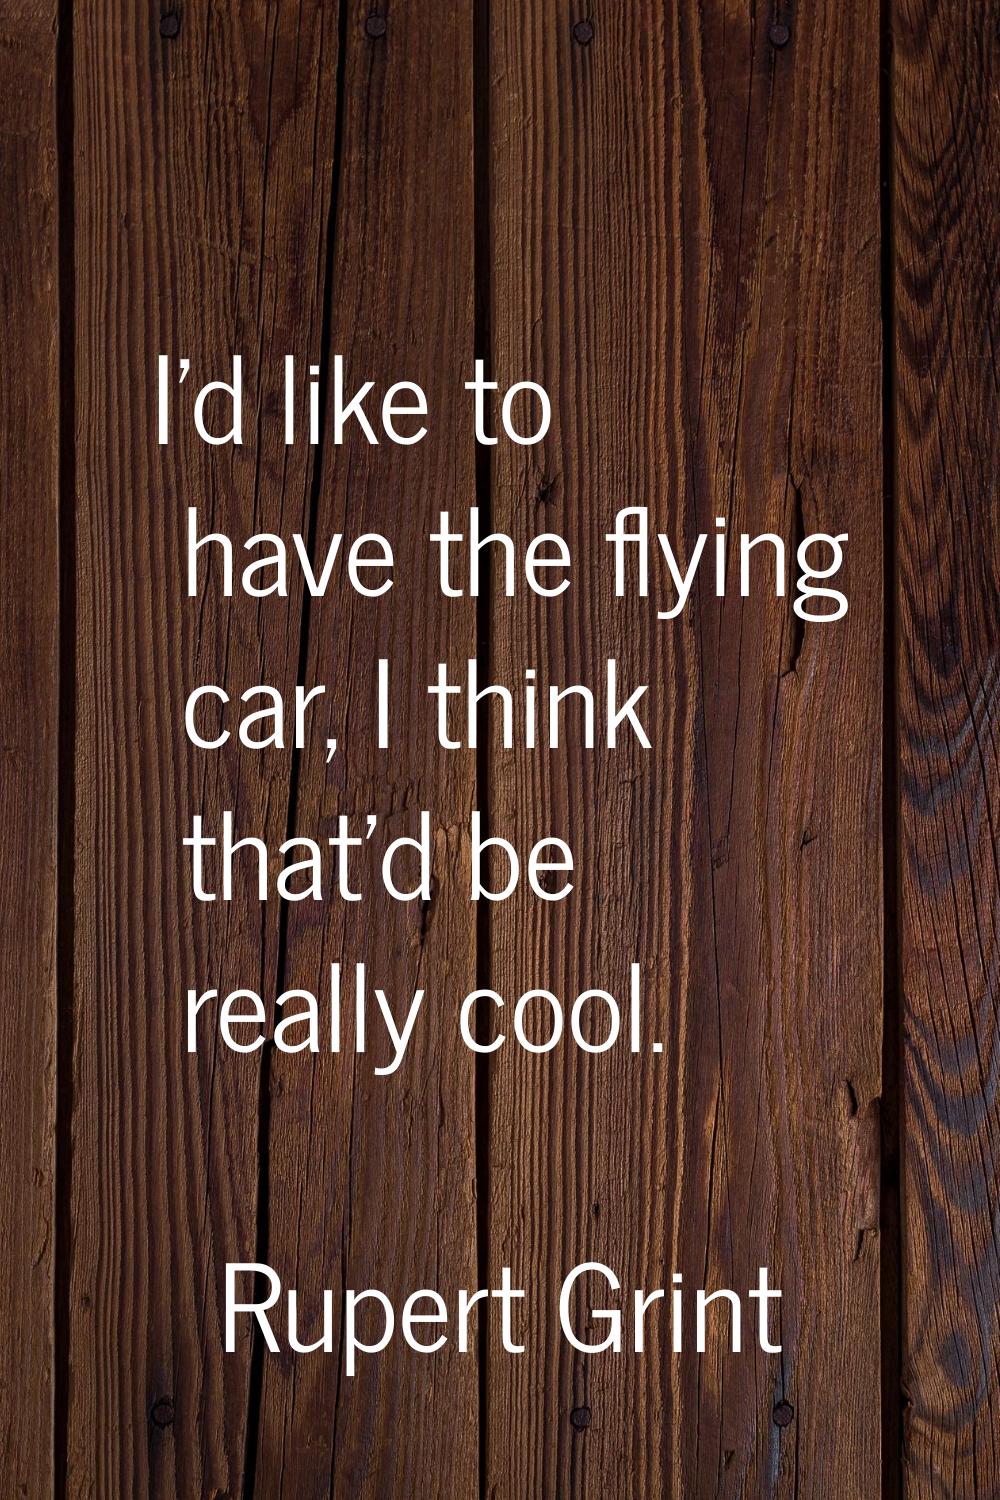 I'd like to have the flying car, I think that'd be really cool.